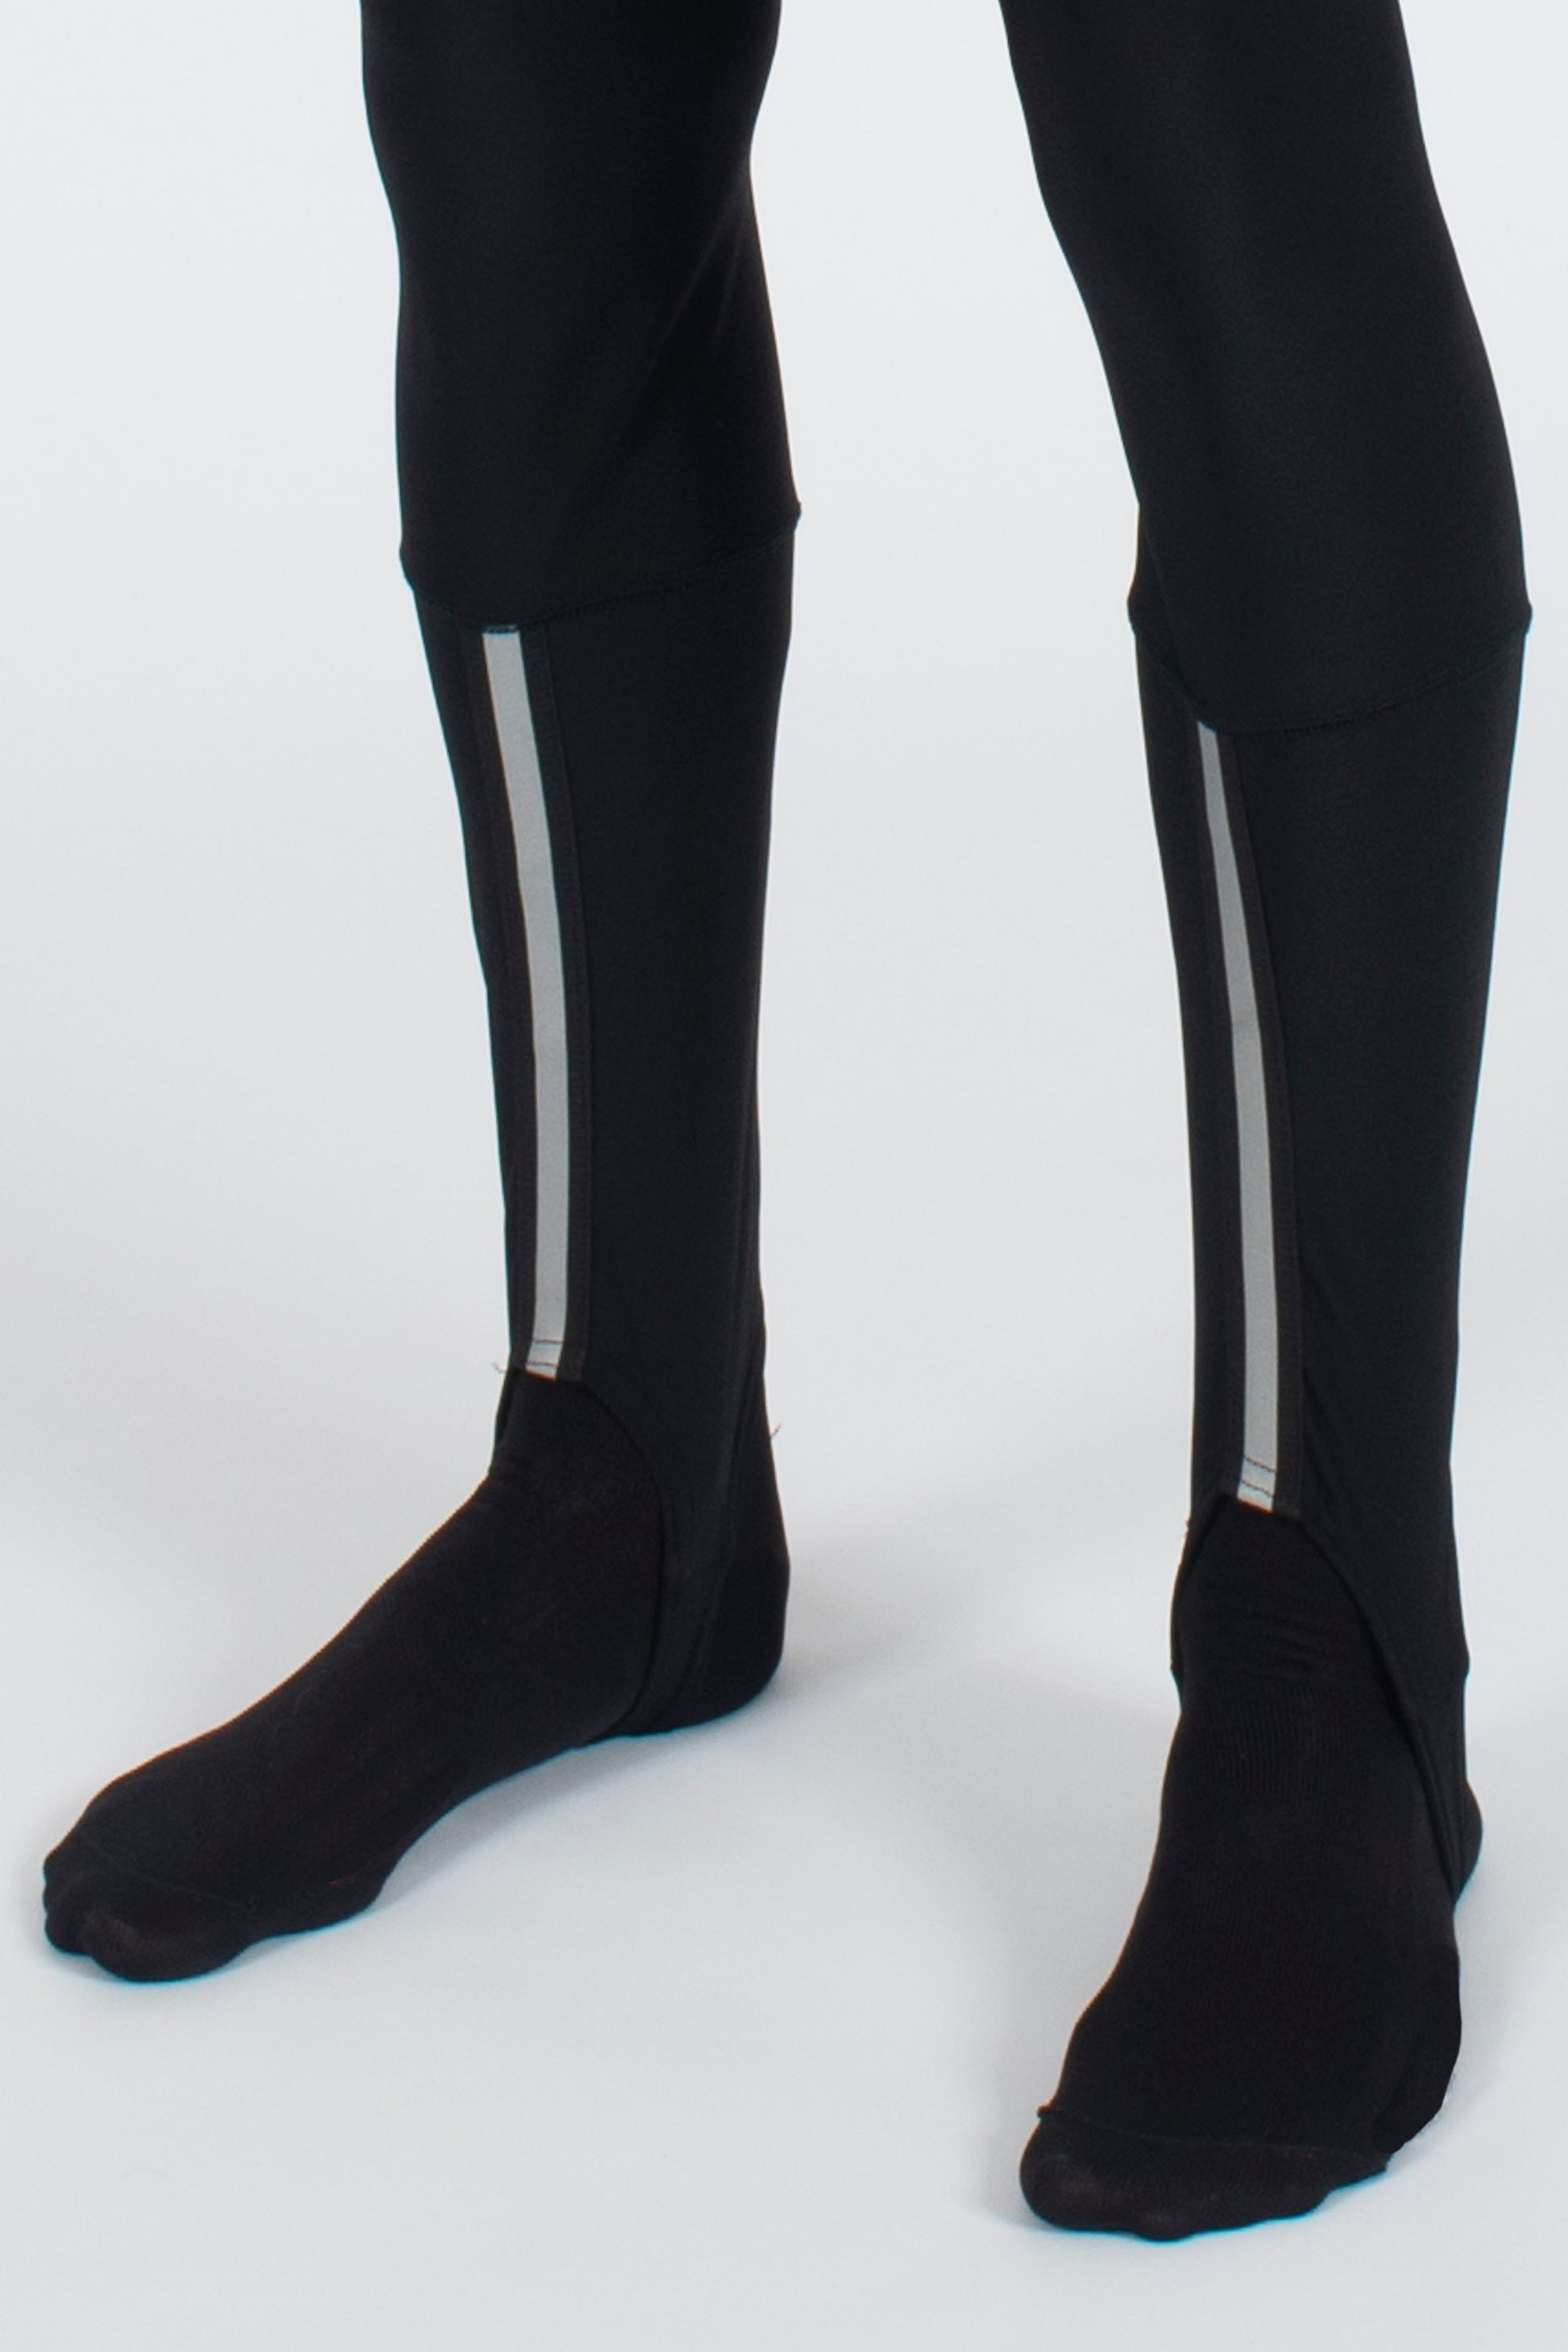 Thermal Roubaix Bibtights - Lusso Cycle Wear